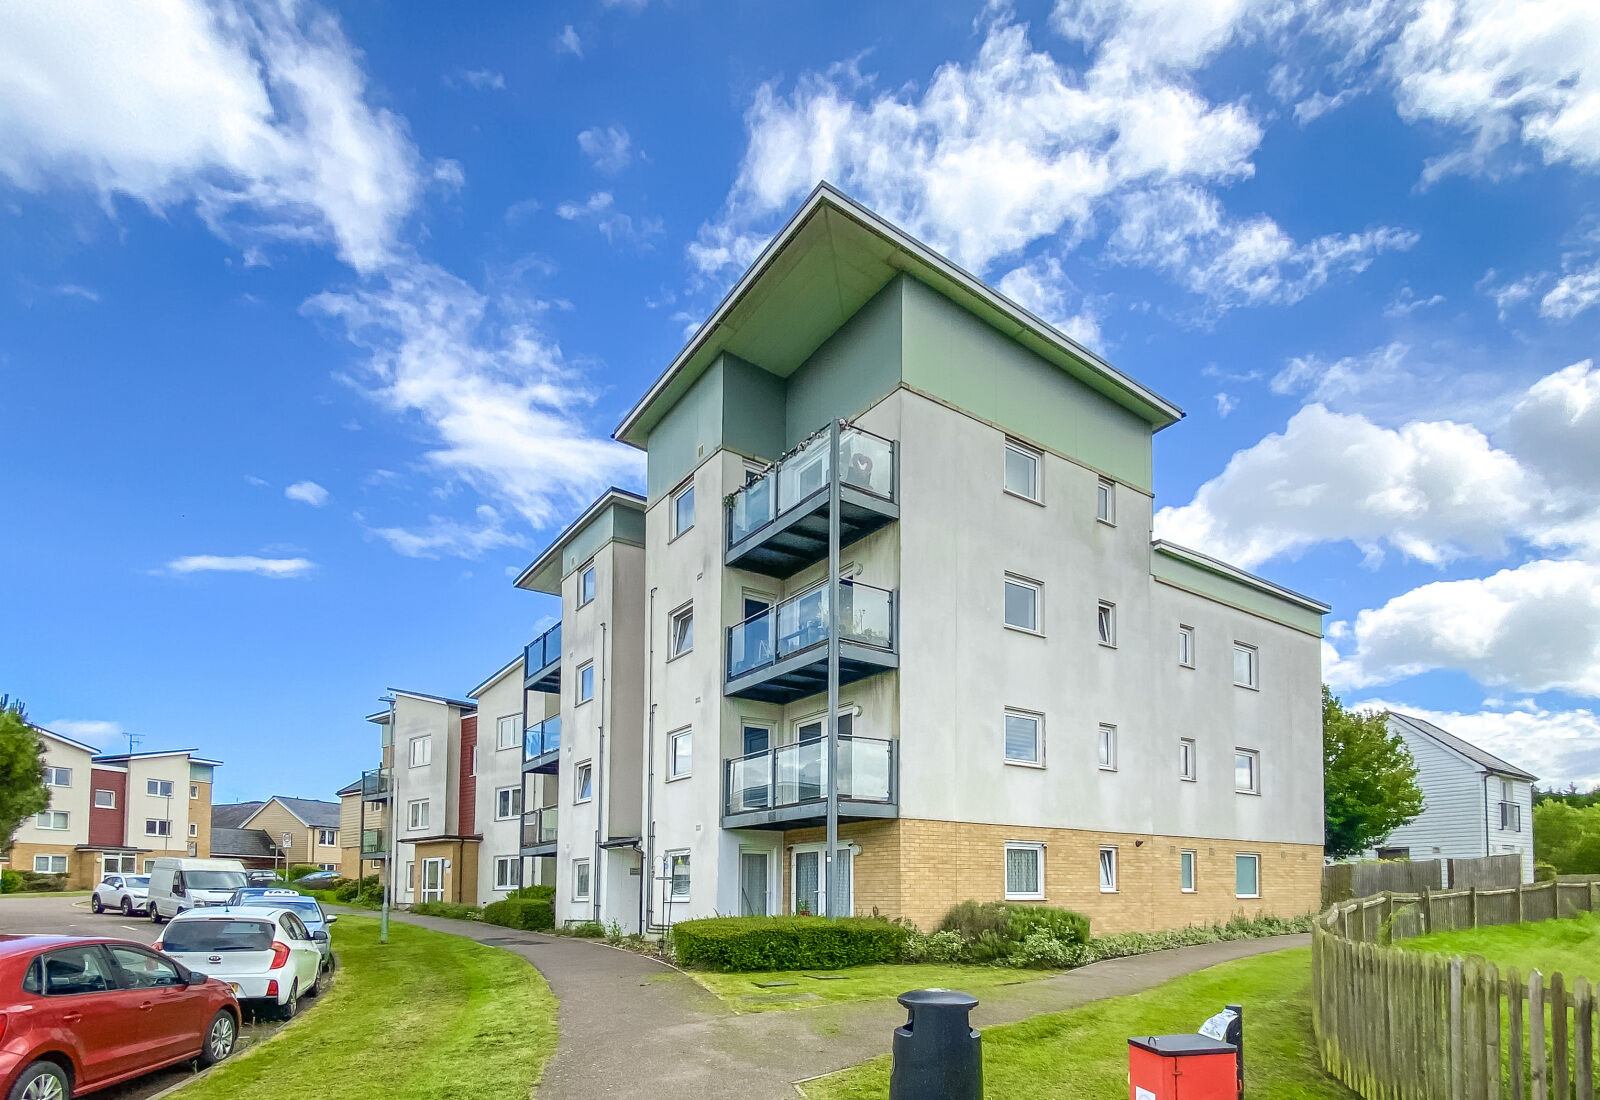 2 bedroom  flat to rent, Available now Bowhill Way, Fifth Avenue, CM20, main image